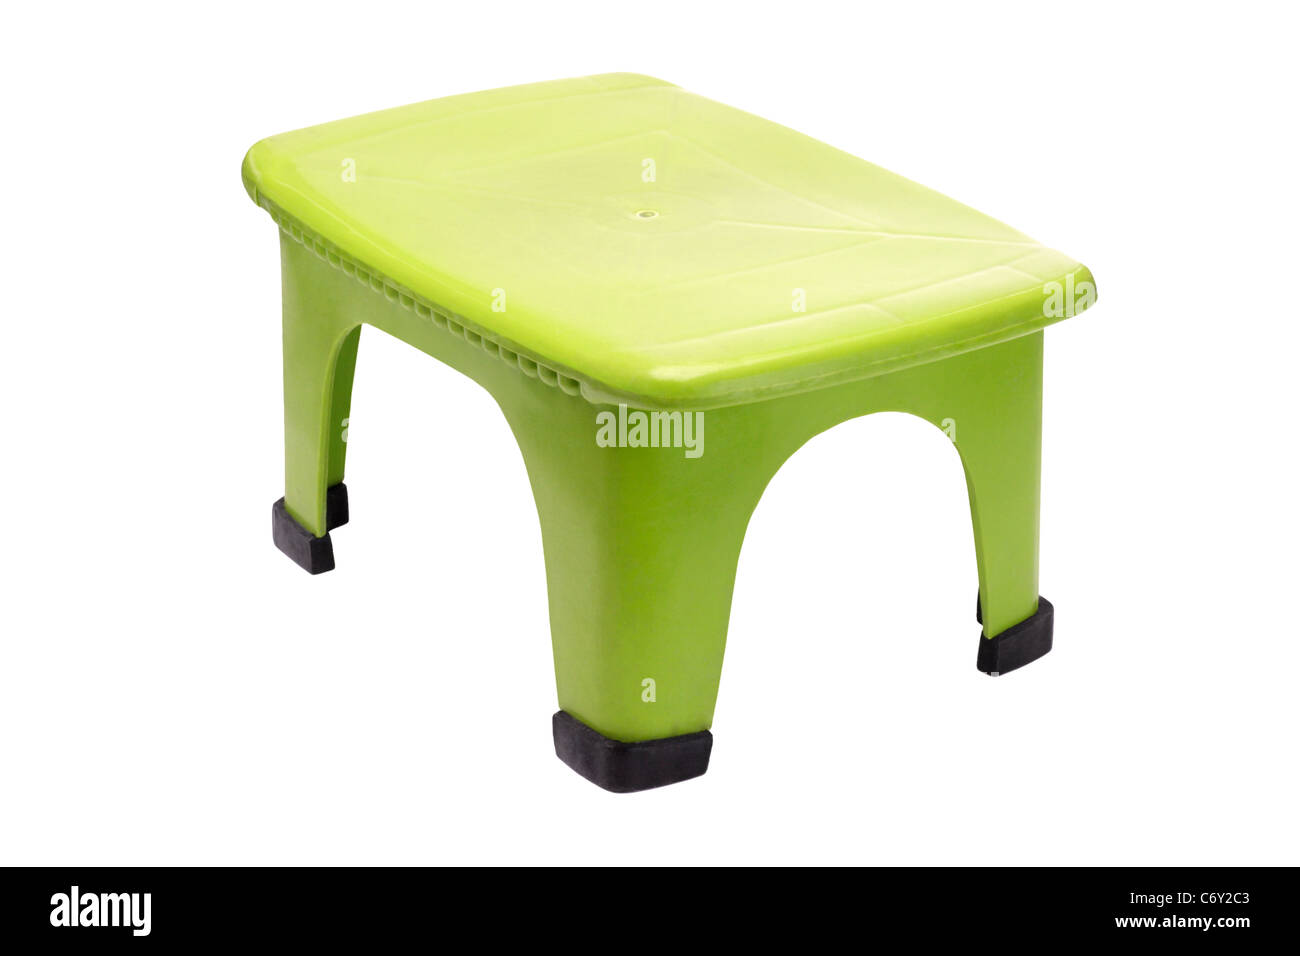 Small green plastic stool on white background Stock Photo